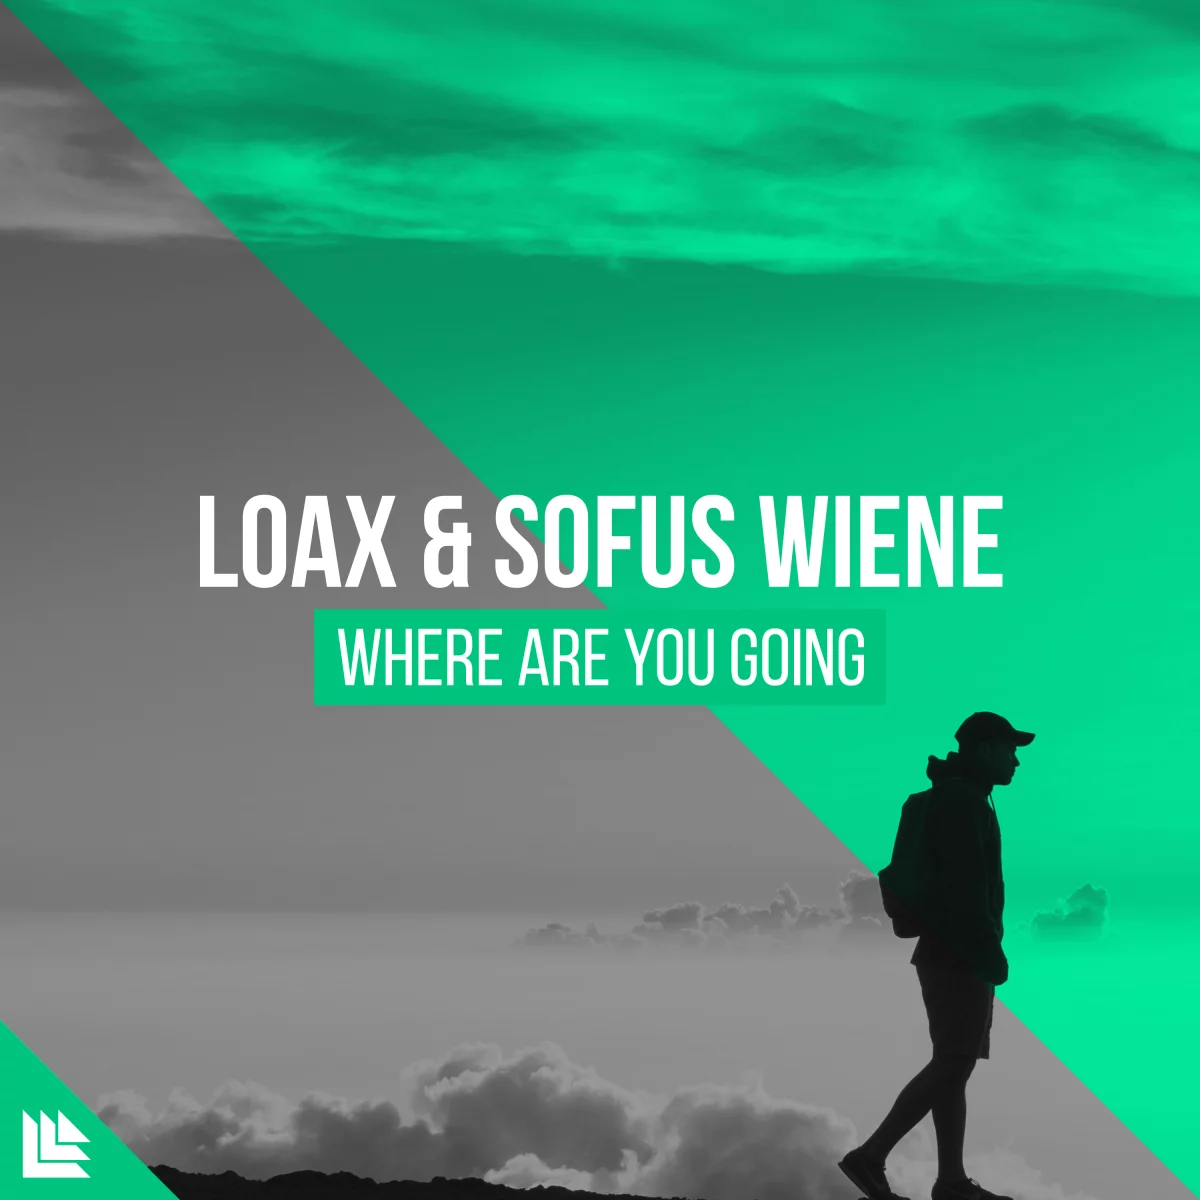 Where Are You Going - LoaX⁠ & Sofus Wiene⁠ 